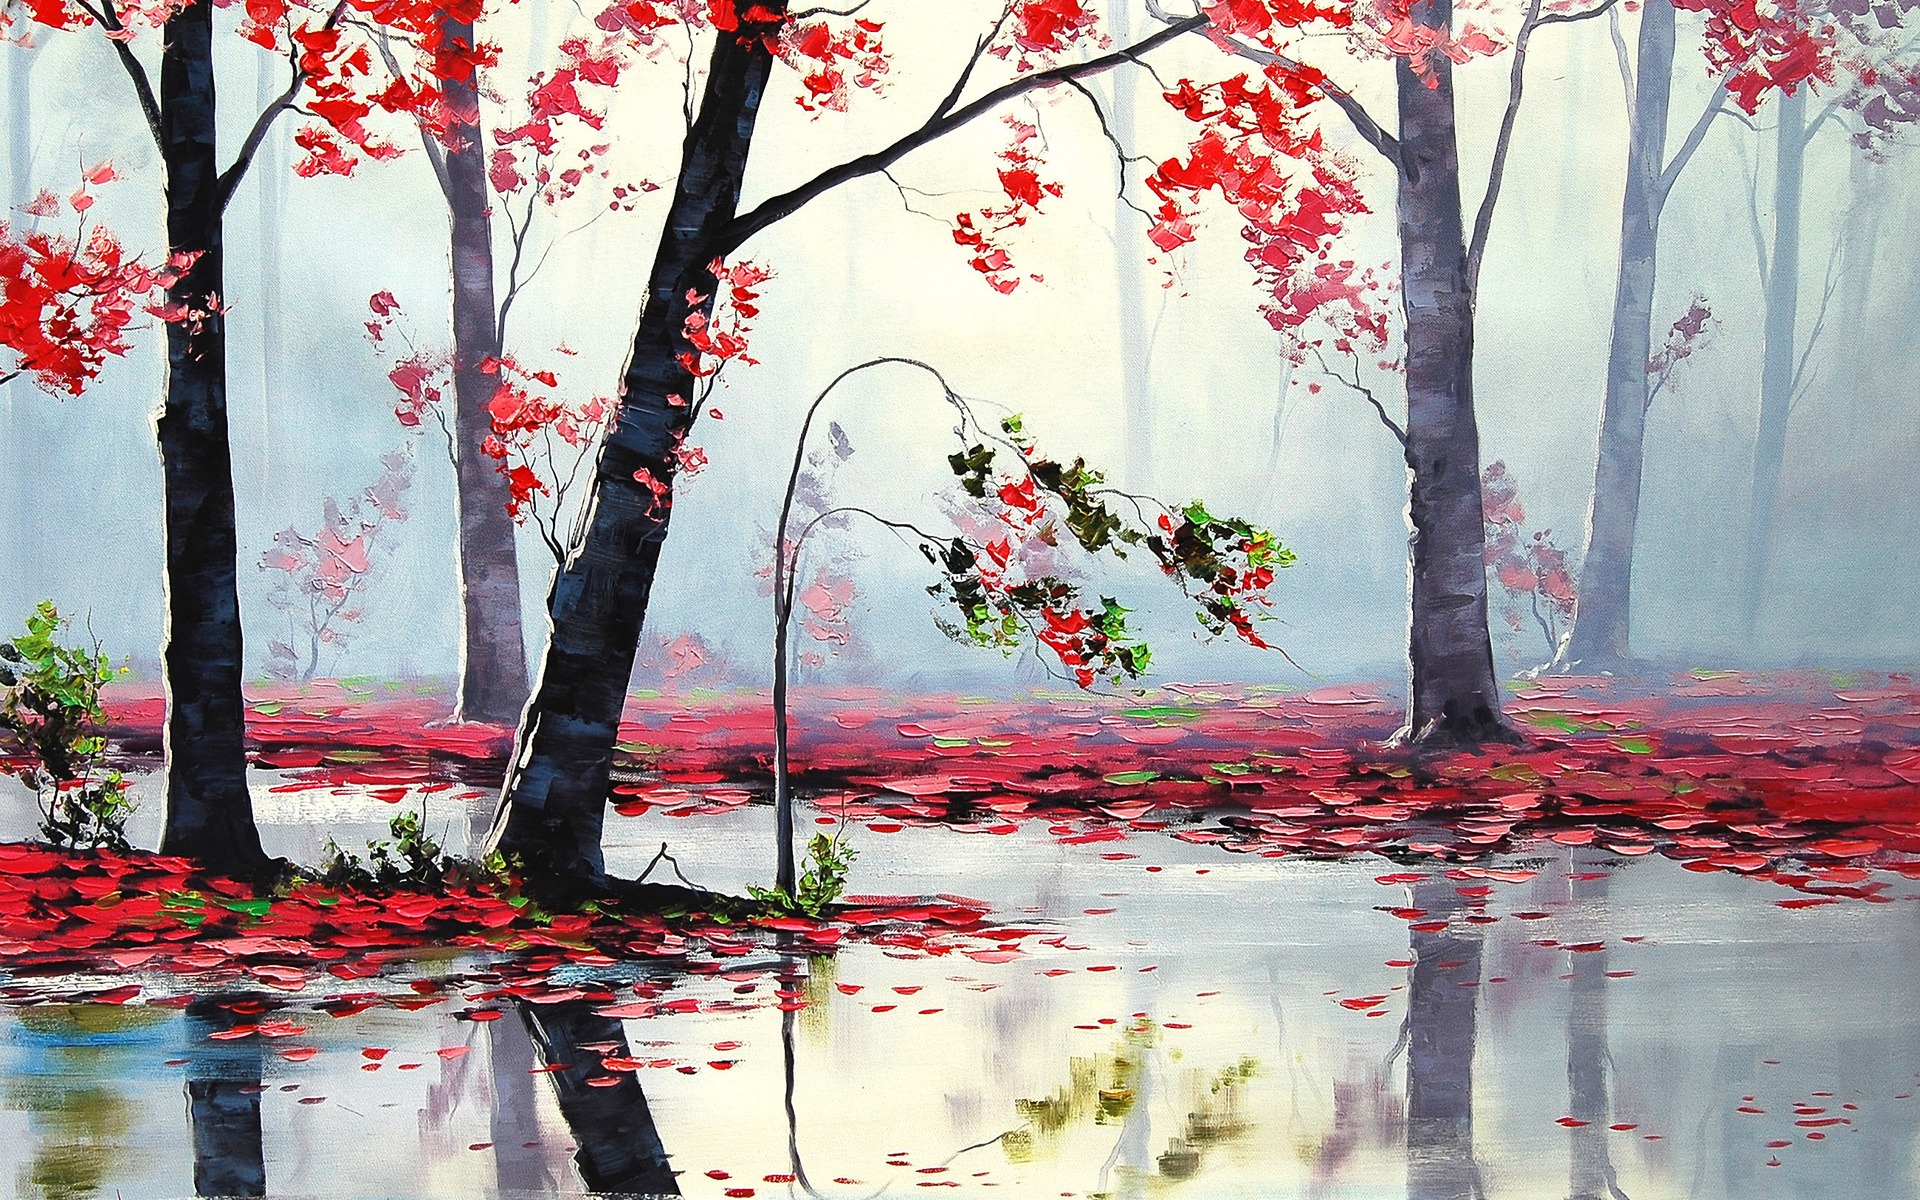 landscapes, Nature, Trees, Forest, Autumn, Fall, Seasons, Leaves, Paintings, Artistic, Rain, Wet, Reflection Wallpaper